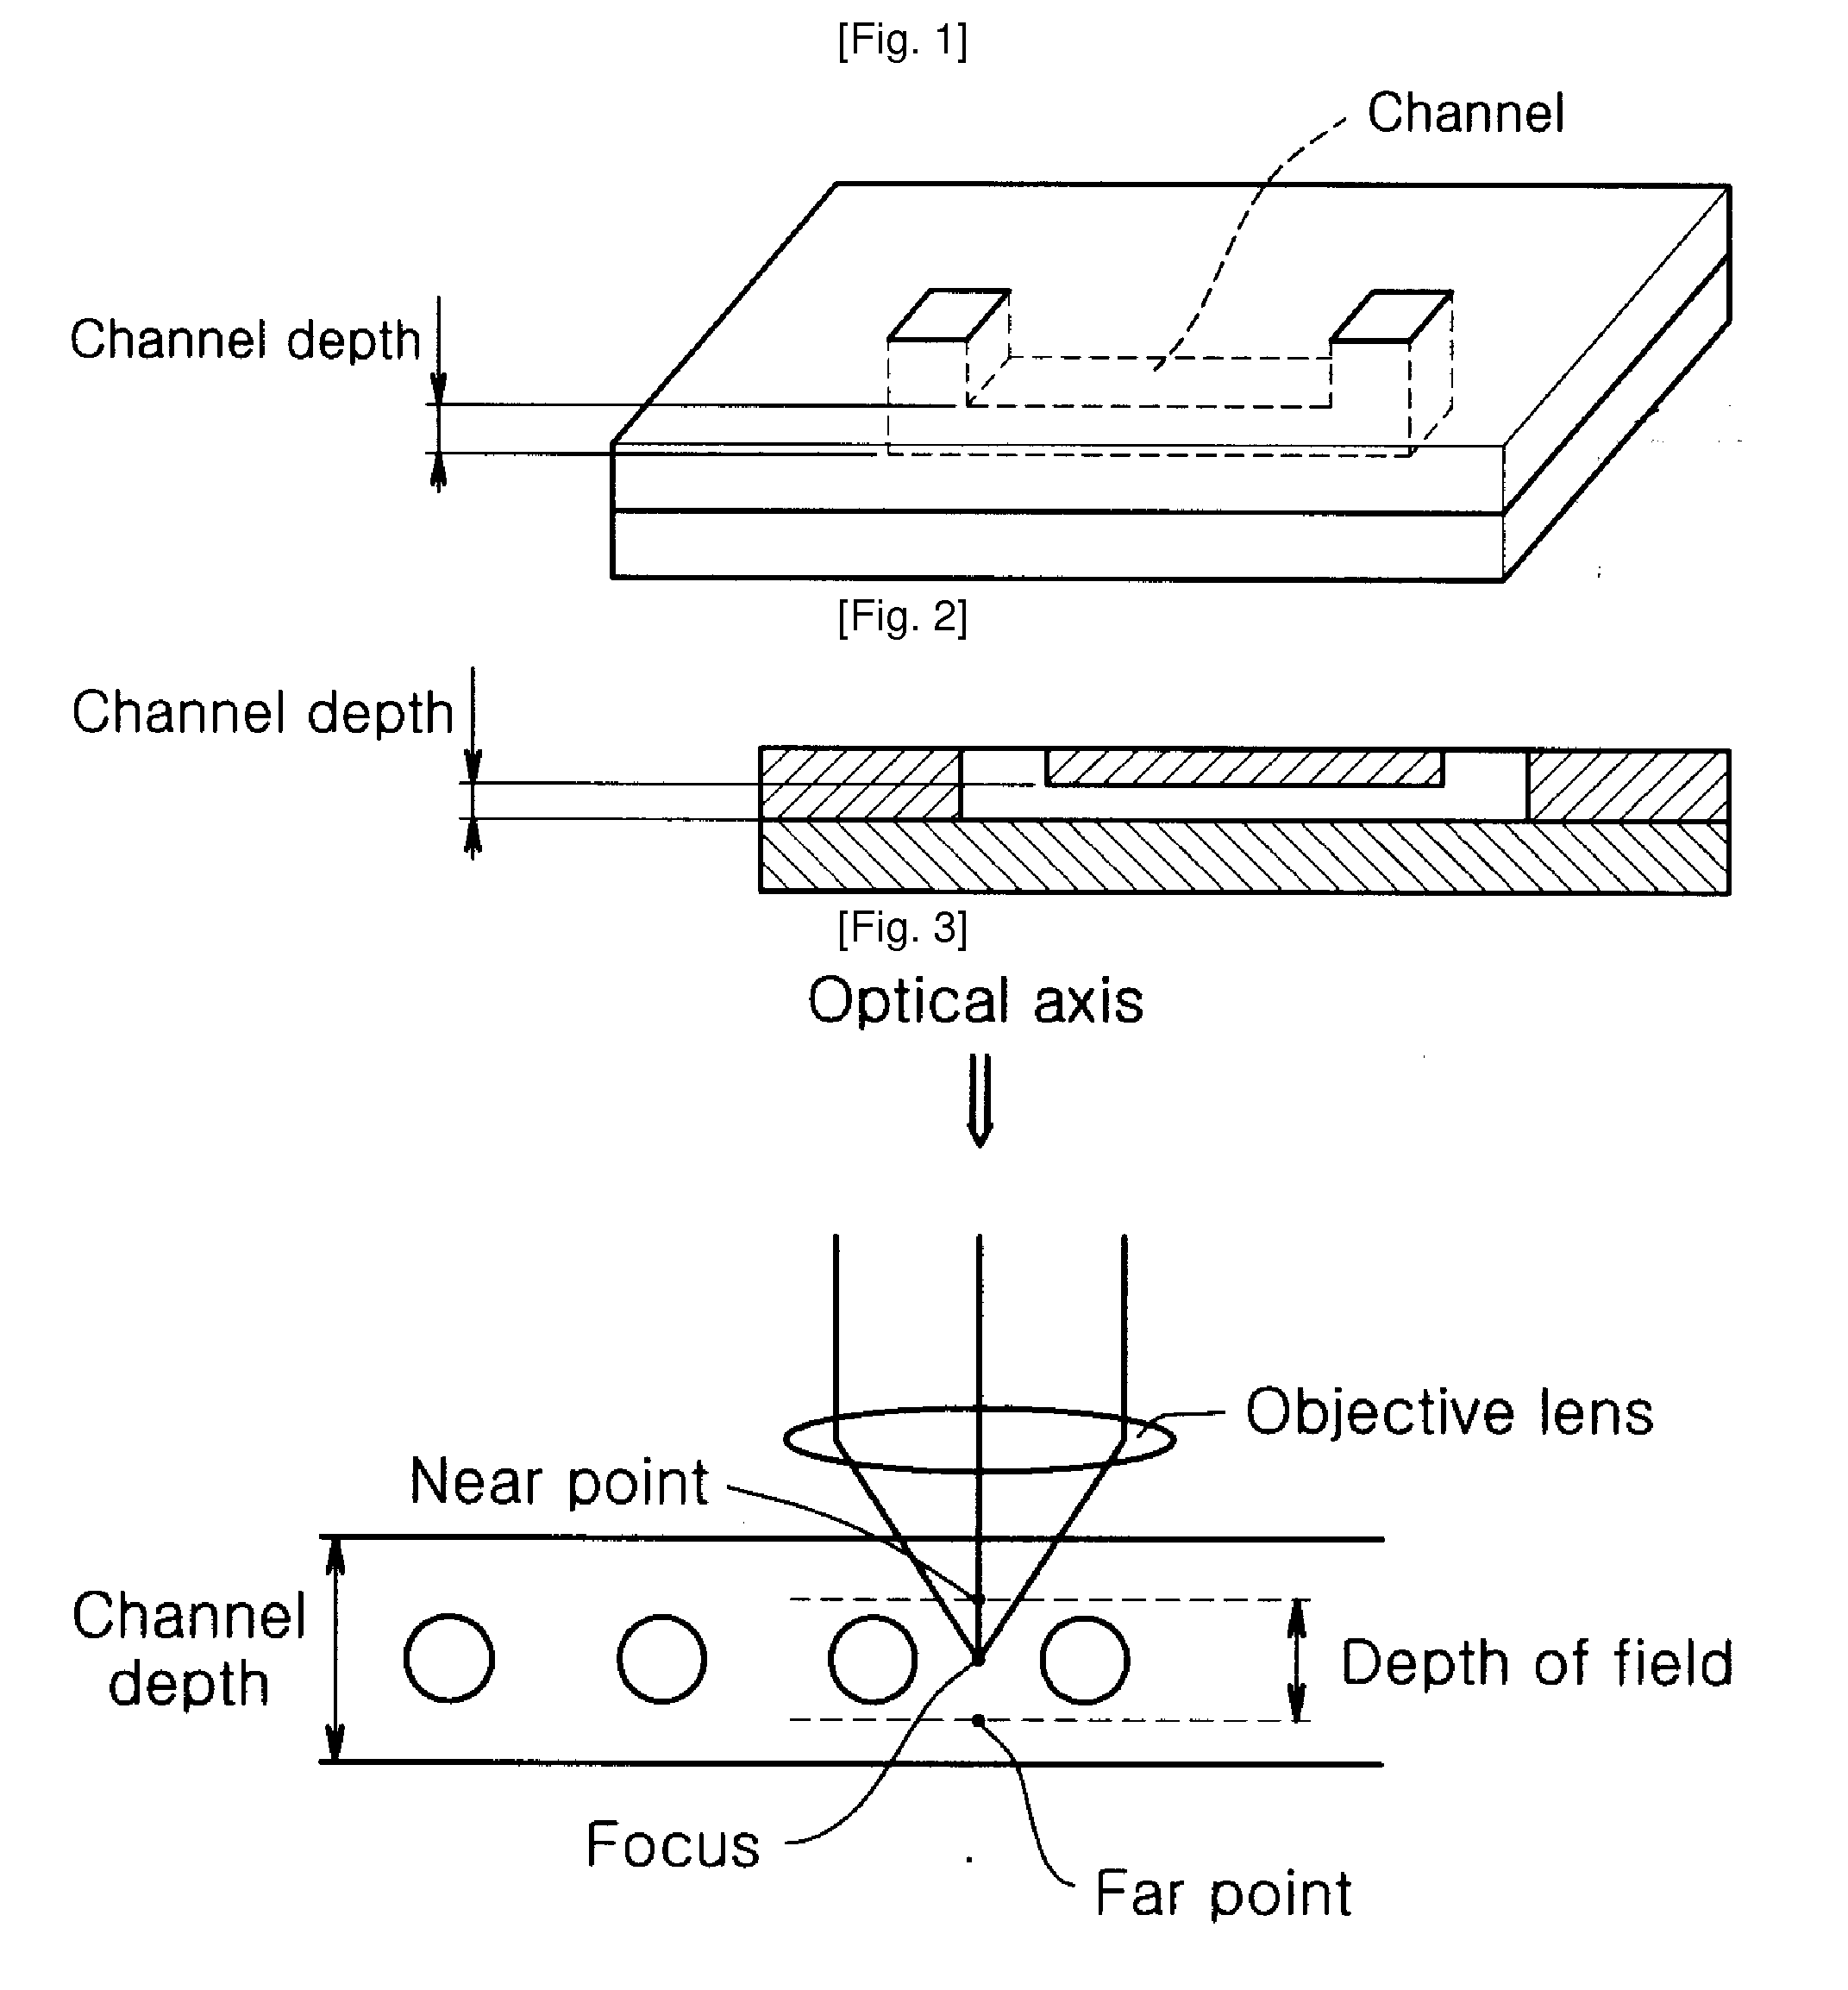 Chip Having Microchannel For Counting Specific Micro Particles Among Floating Micro Particle Mixture By Optical Means And A Method For Counting Micro Particles Using The Same